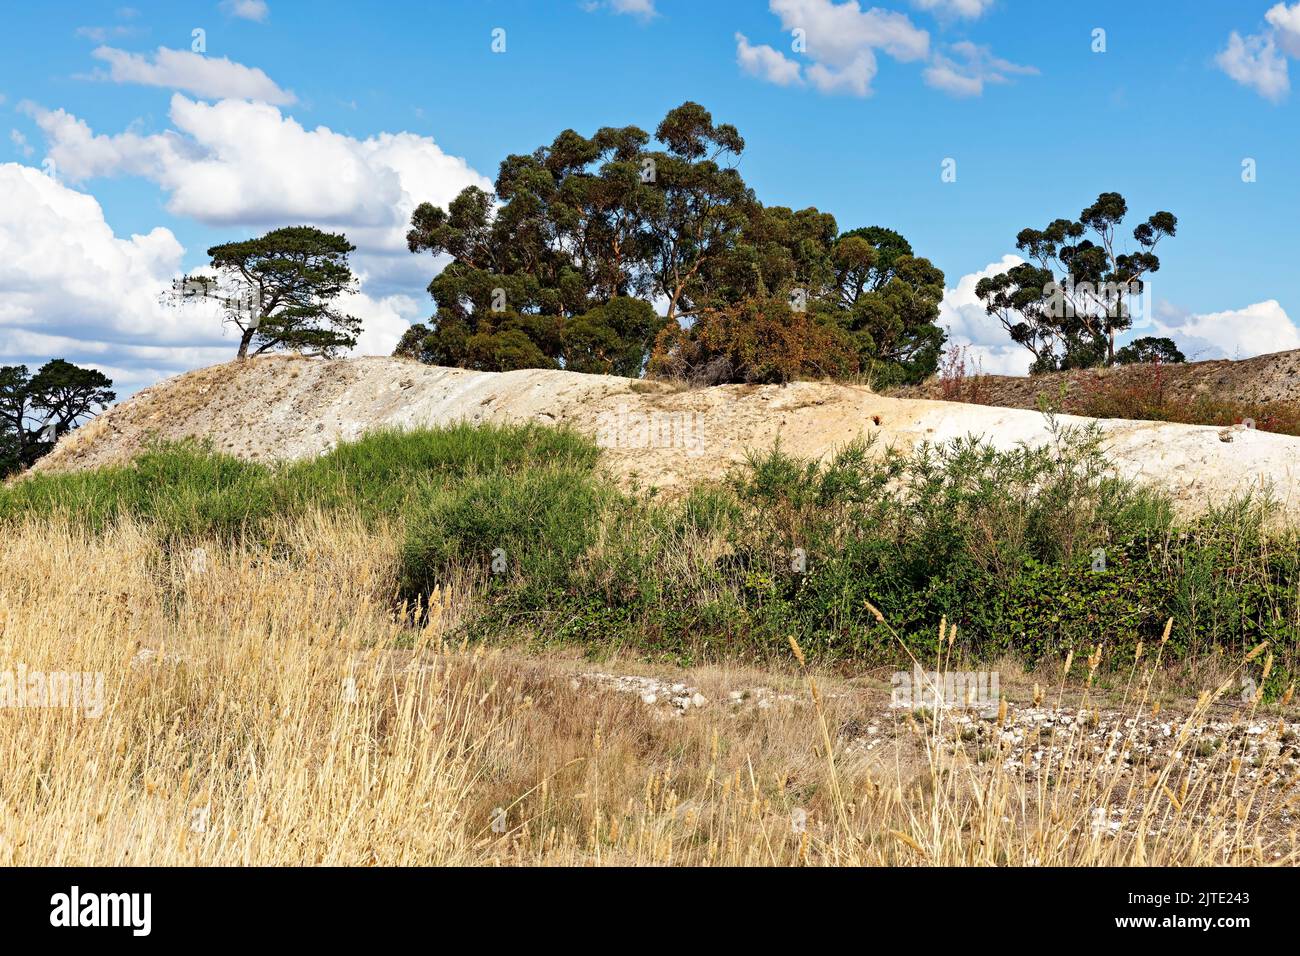 Clunes Australia / The former Lothair Gold Mine in Clunes in Victoria Australia.The discovery of gold in 1850 marked the begining of the rich gold rus Stock Photo